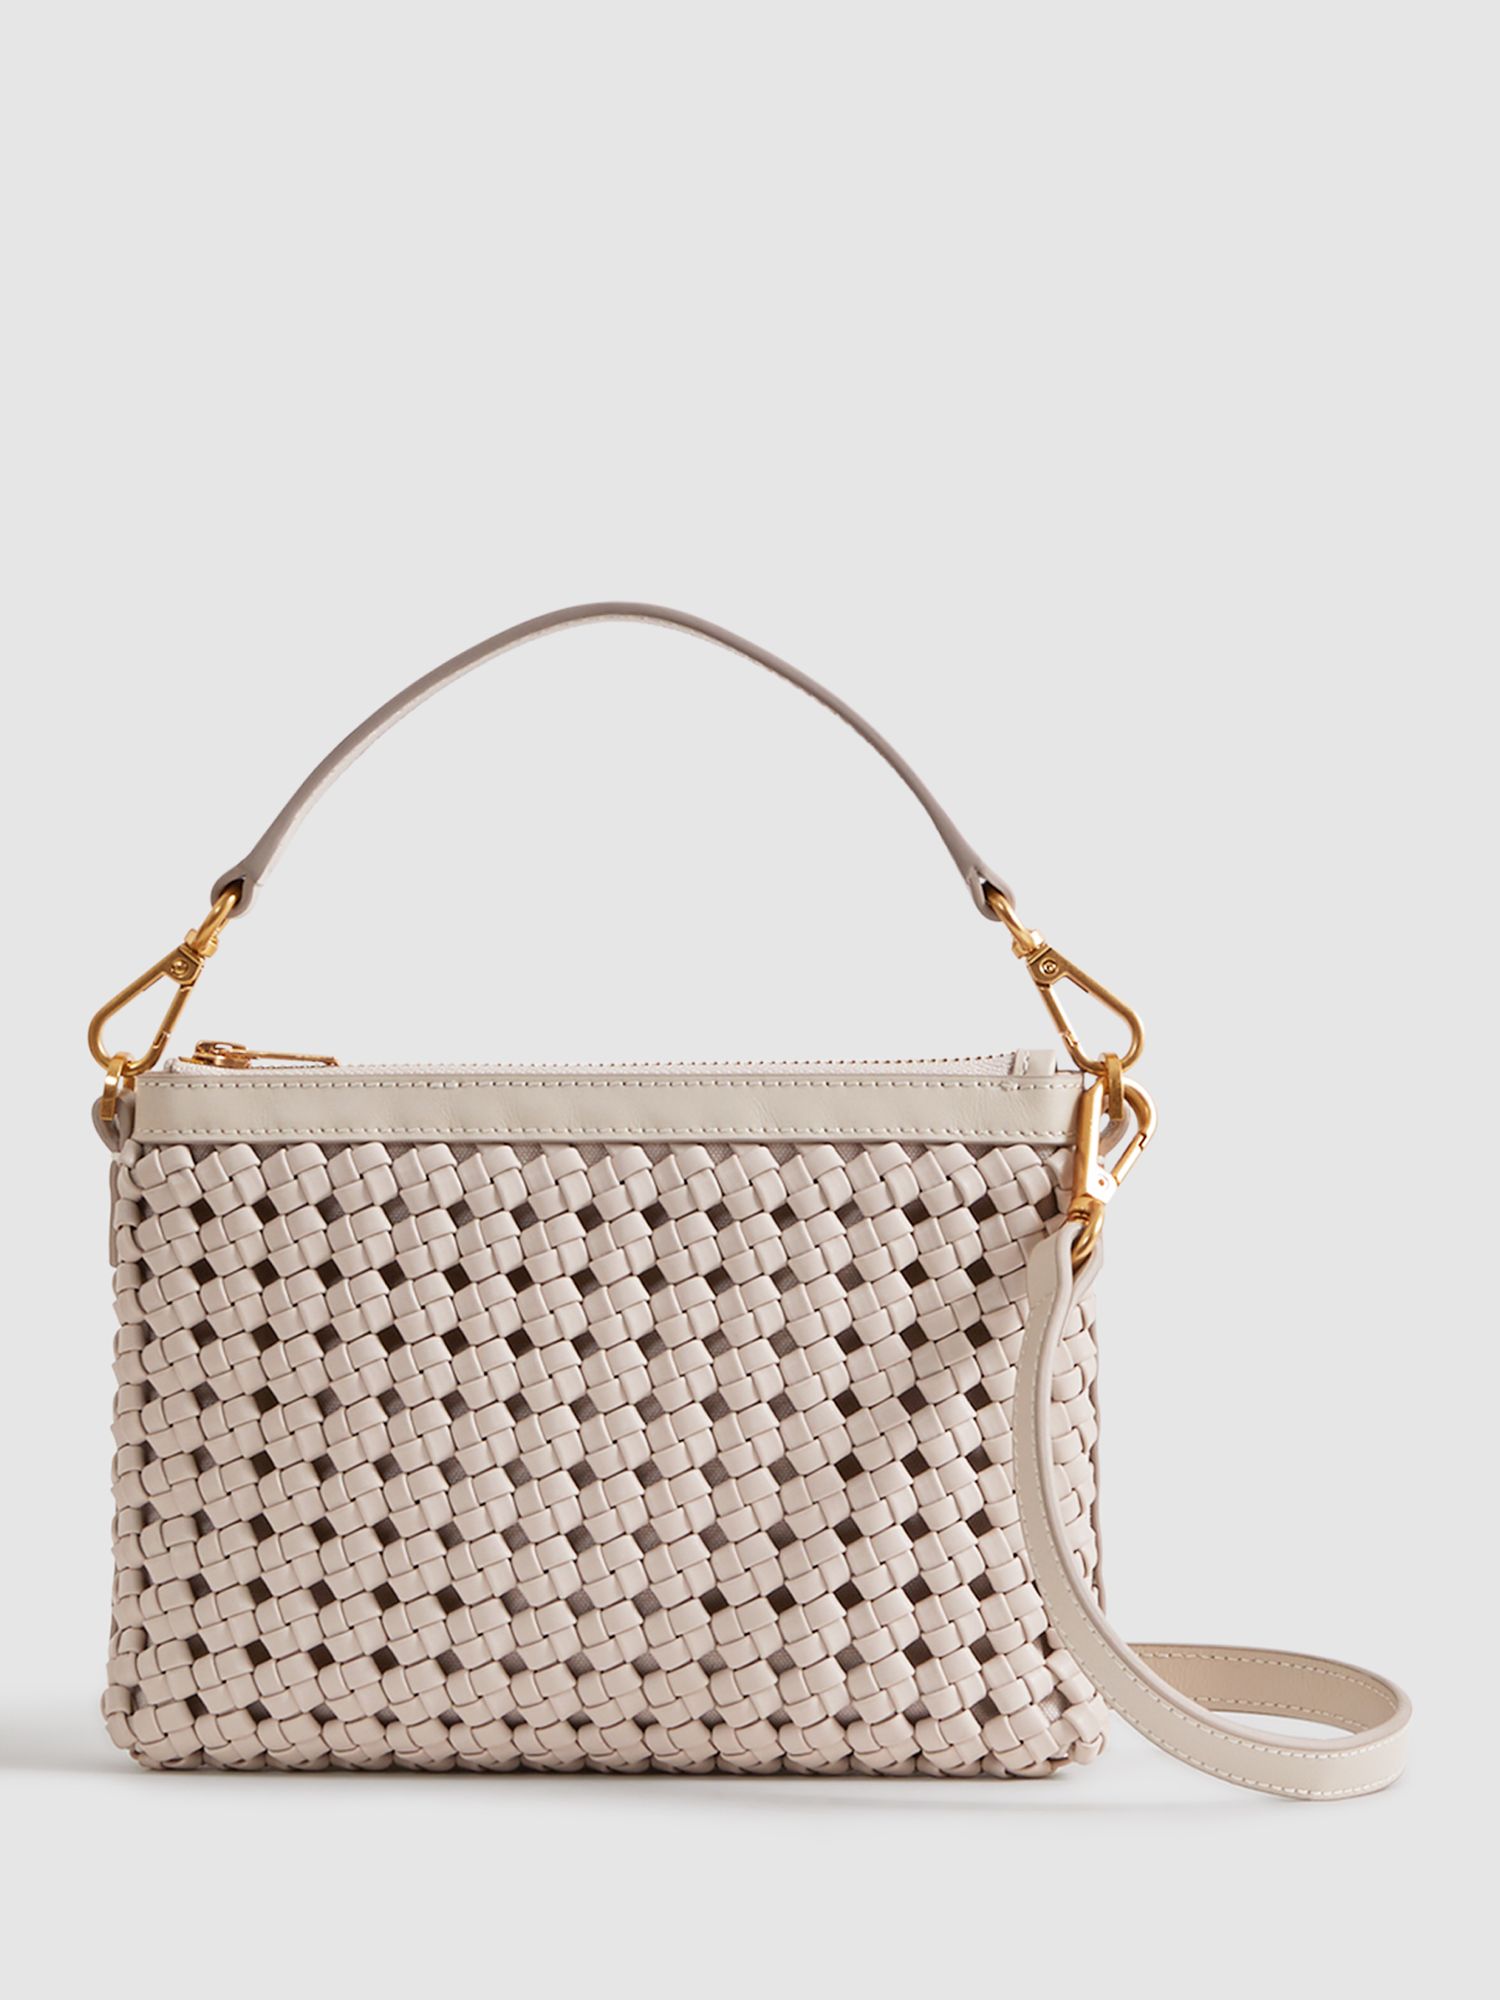 Reiss Brompton Woven Leather Shoulder Bag, Stone at John Lewis & Partners